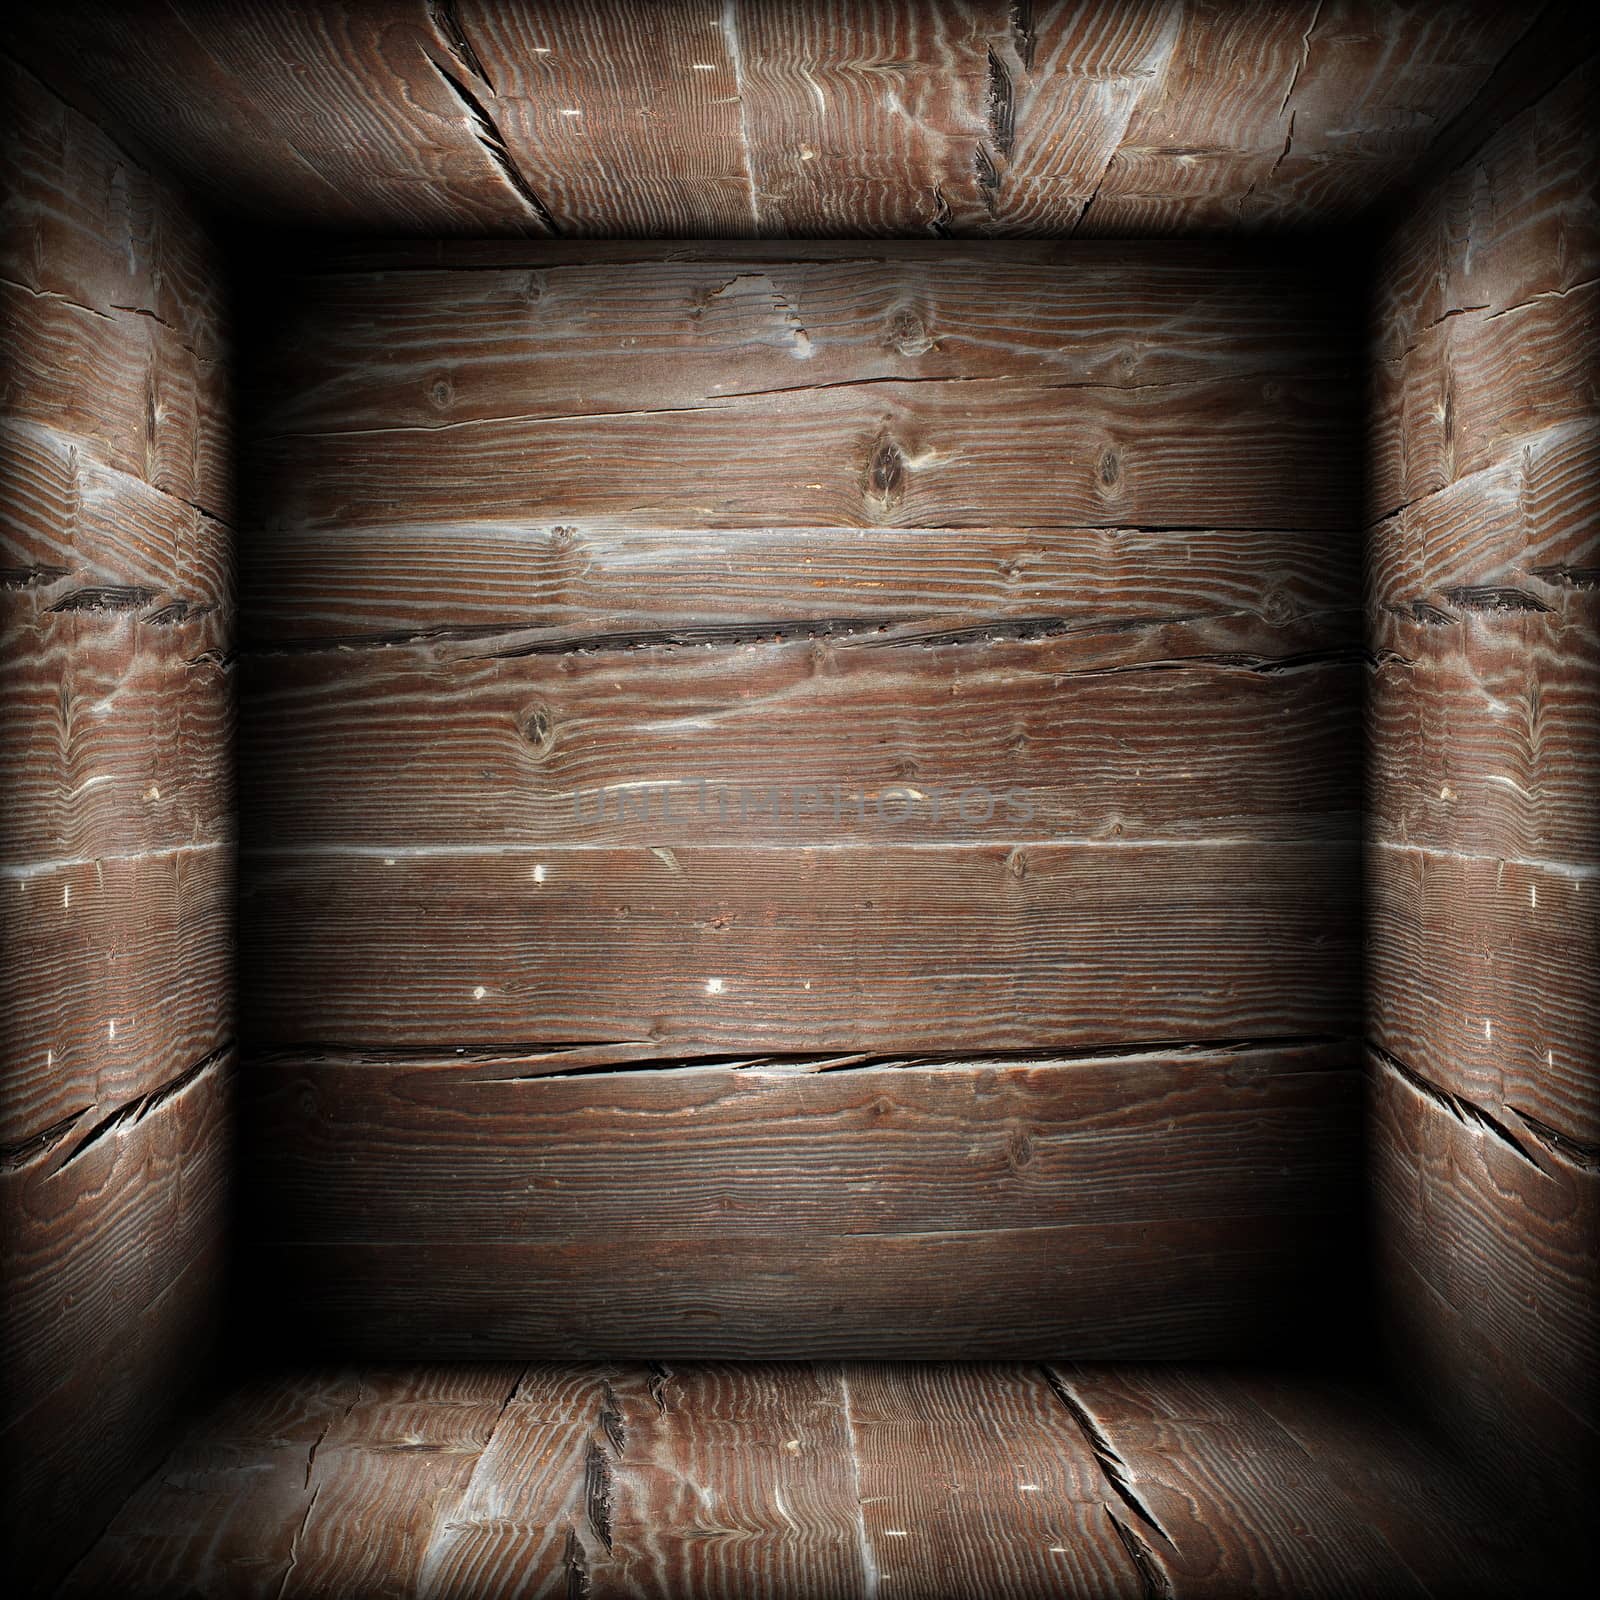 abstact view of wooden box interior by taviphoto